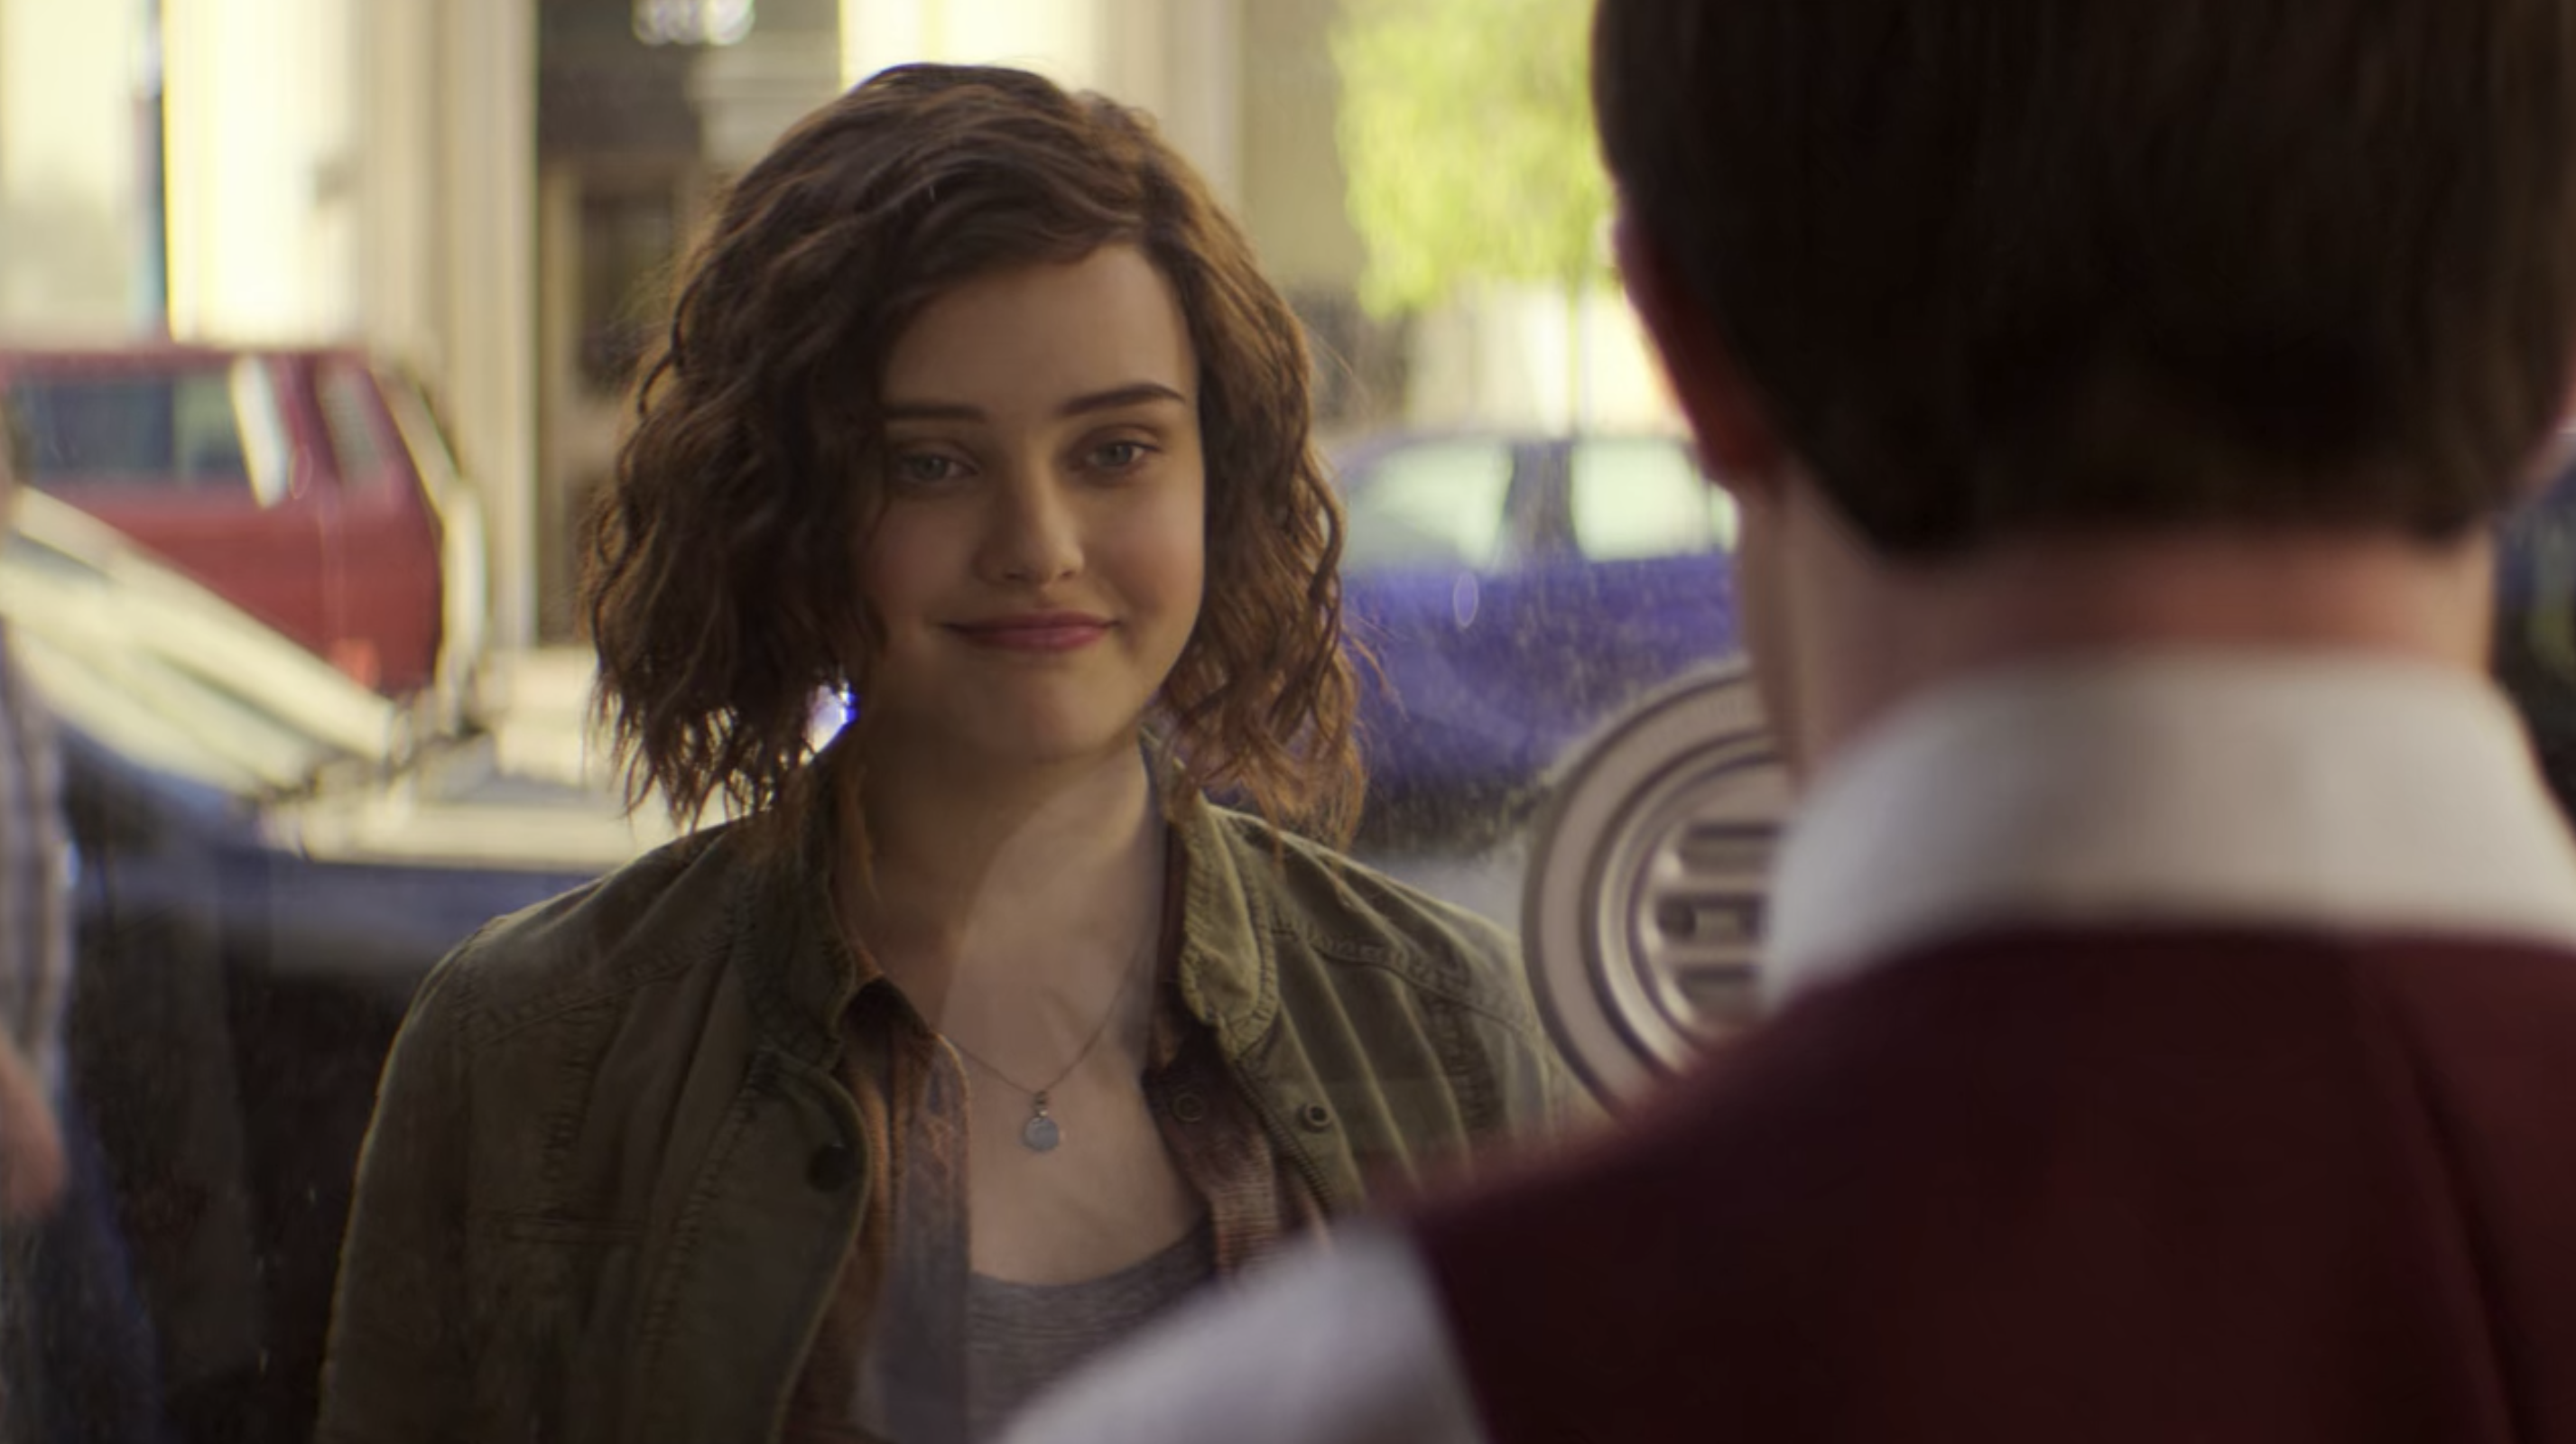 Katherine Langford in a short, stringy bob wig